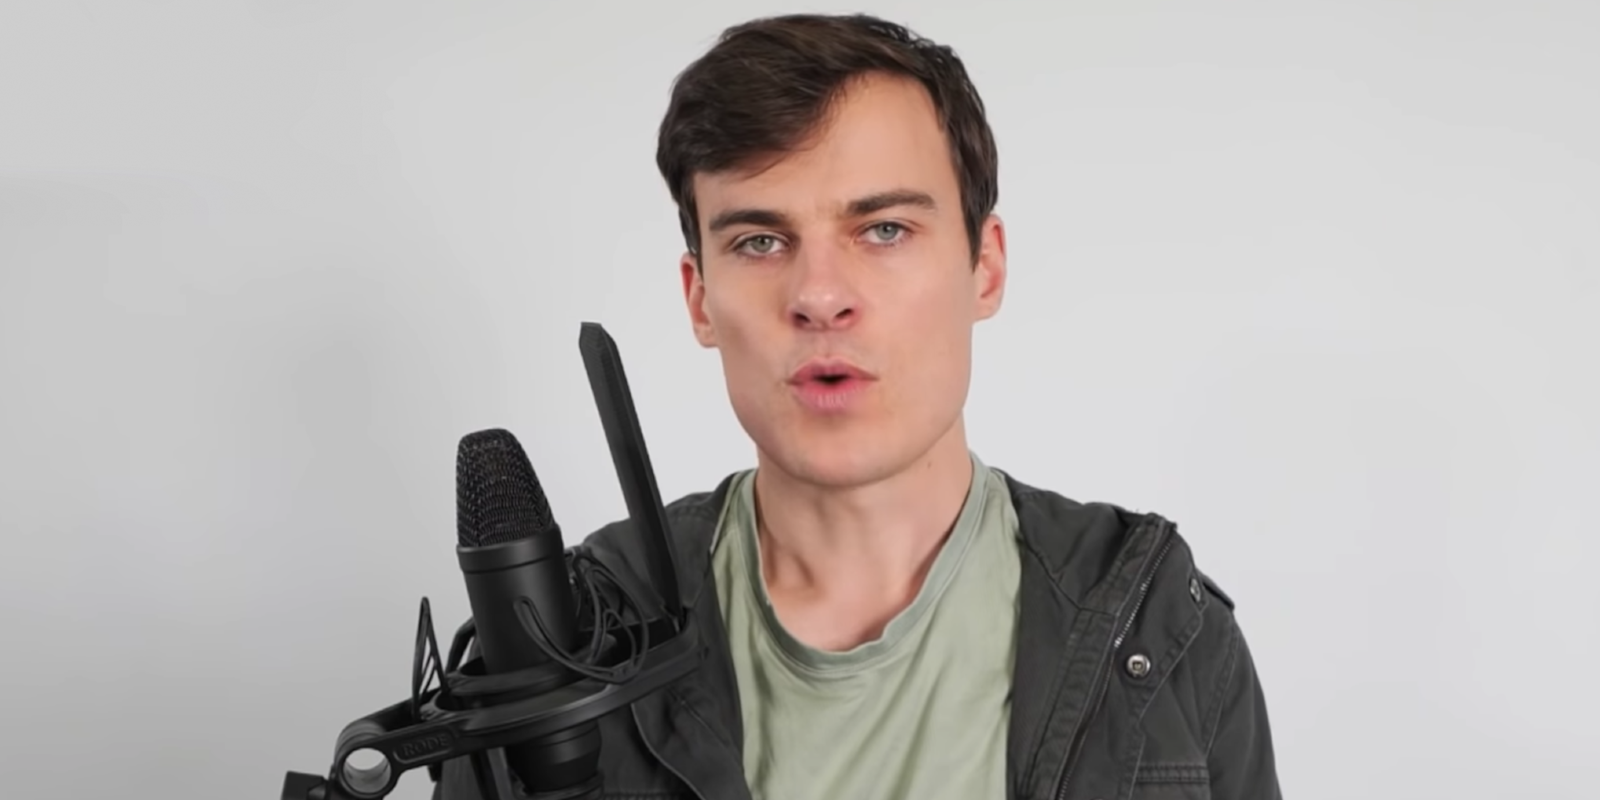 A man speaking into a microphone over youtube arrest